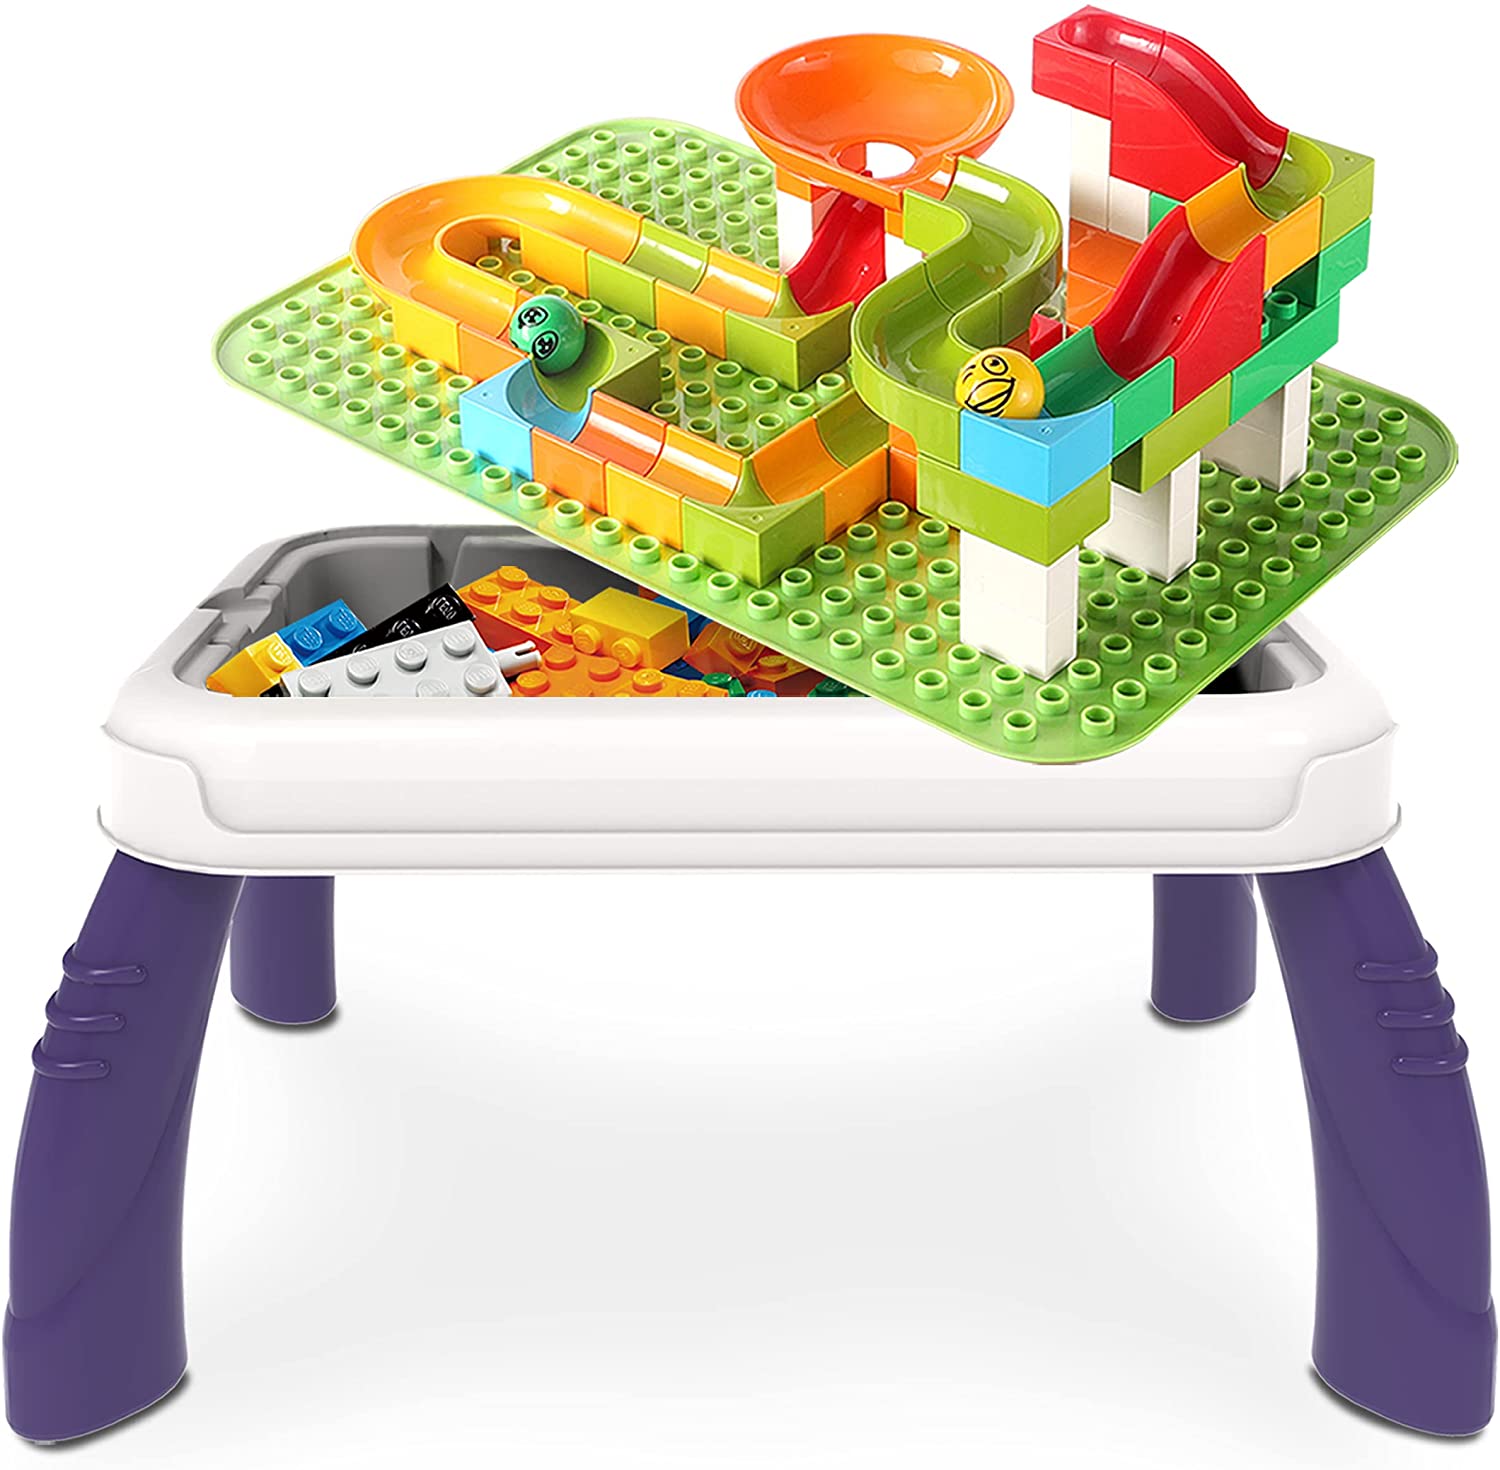 Water Table See SPEING Building Block Table Building Block Table with Storage Learning Table Multi Kids Activity Table with Large Building Blocks Compatible Bricks Toy Building Block White 